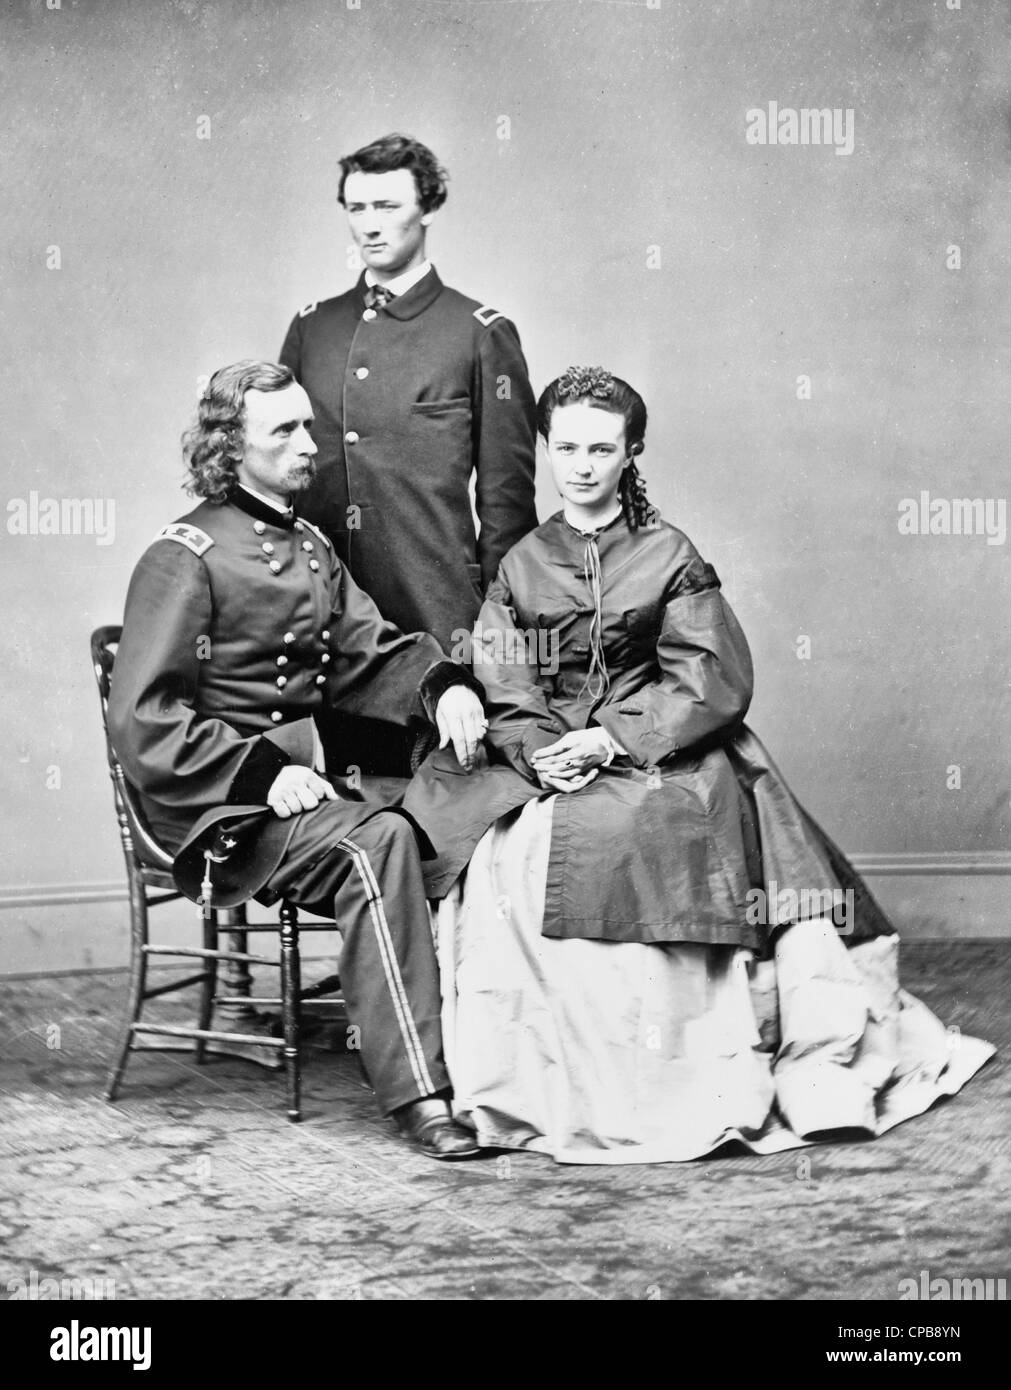 George Armstrong Custer, in uniform, seated with his wife, Elizabeth 'Libbie' Bacon Custer, and his brother, Thomas W. Custer, standing, Circa 1870 Stock Photo